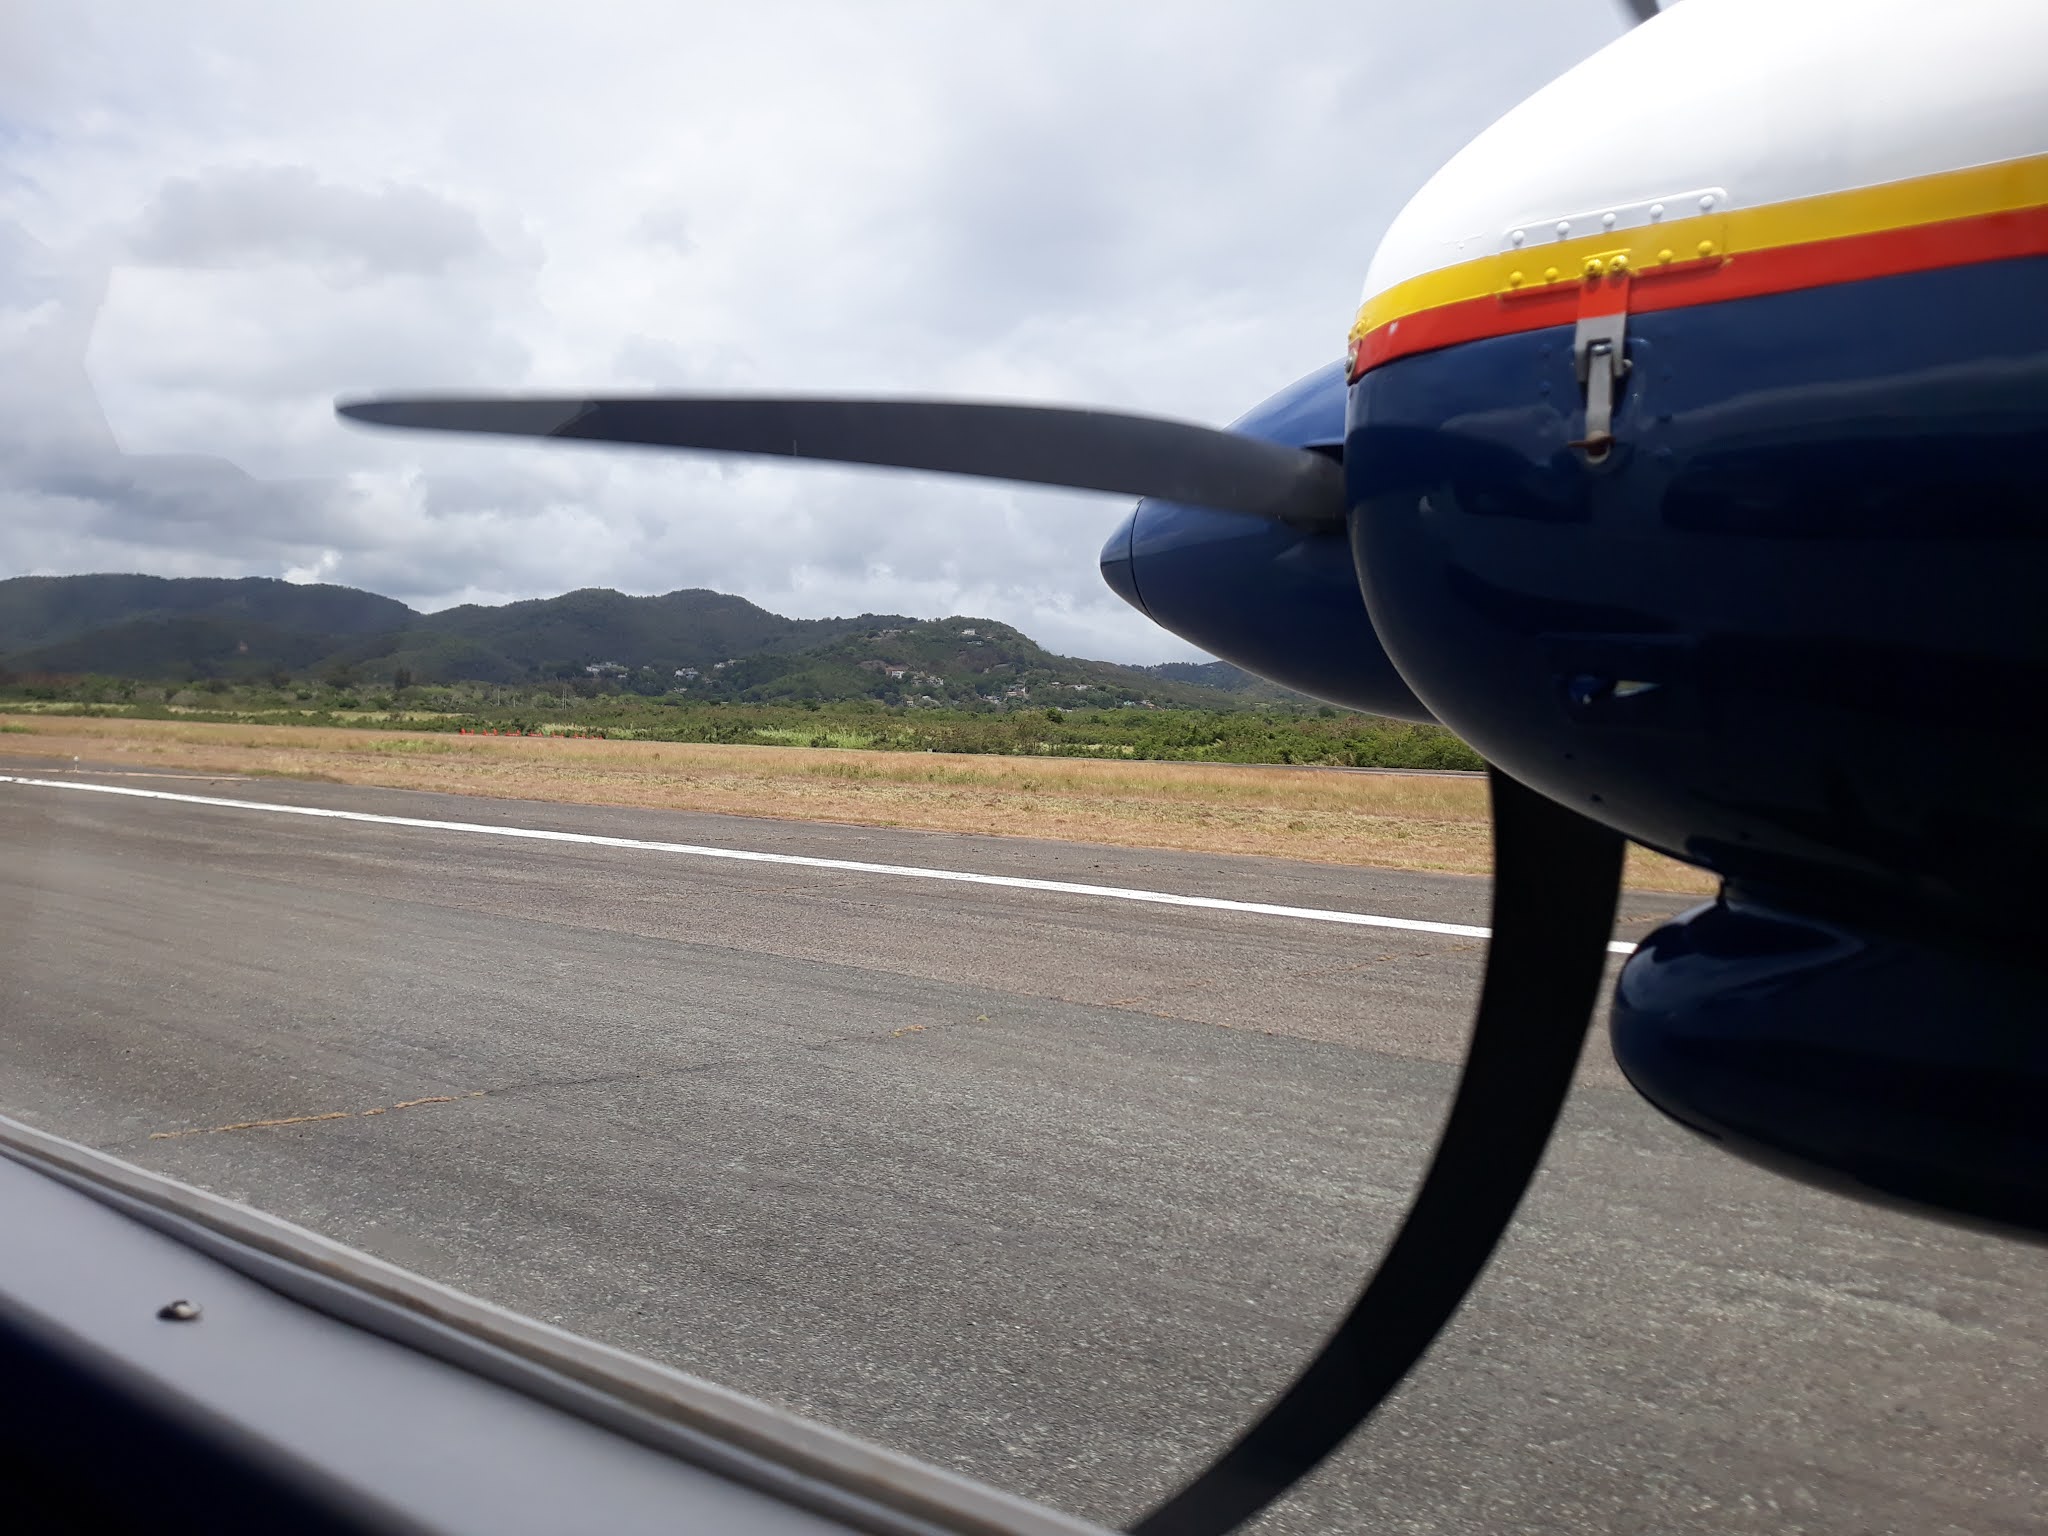 While we are getting our tour cost refunded, we incurred costs more then the tour because of the company canceling at the last minute, with no explanation for the cancelation. Observations Of The Practical Kind Traveling To Puerto Rico S Isla De Vieques